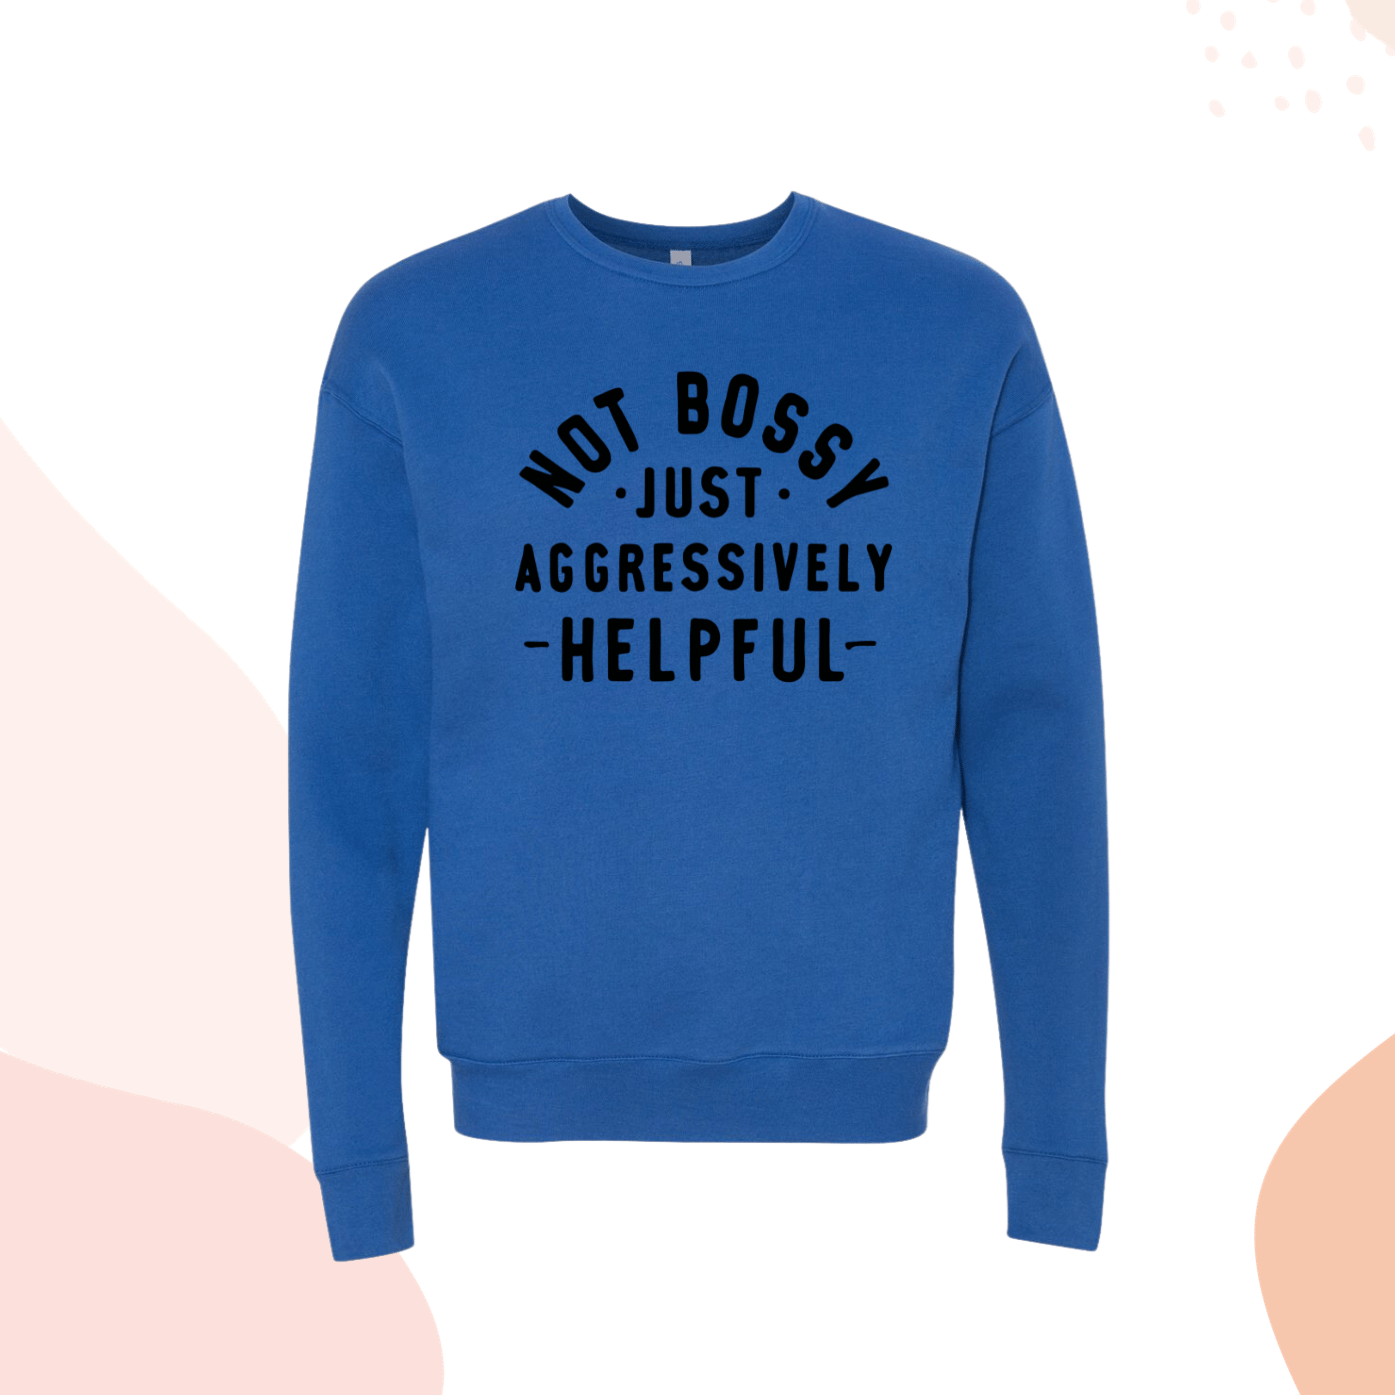 Bossy Lady Royal Blue Not Bossy Just Aggressively Helpful Crewneck Sweatshirt for Women or Men